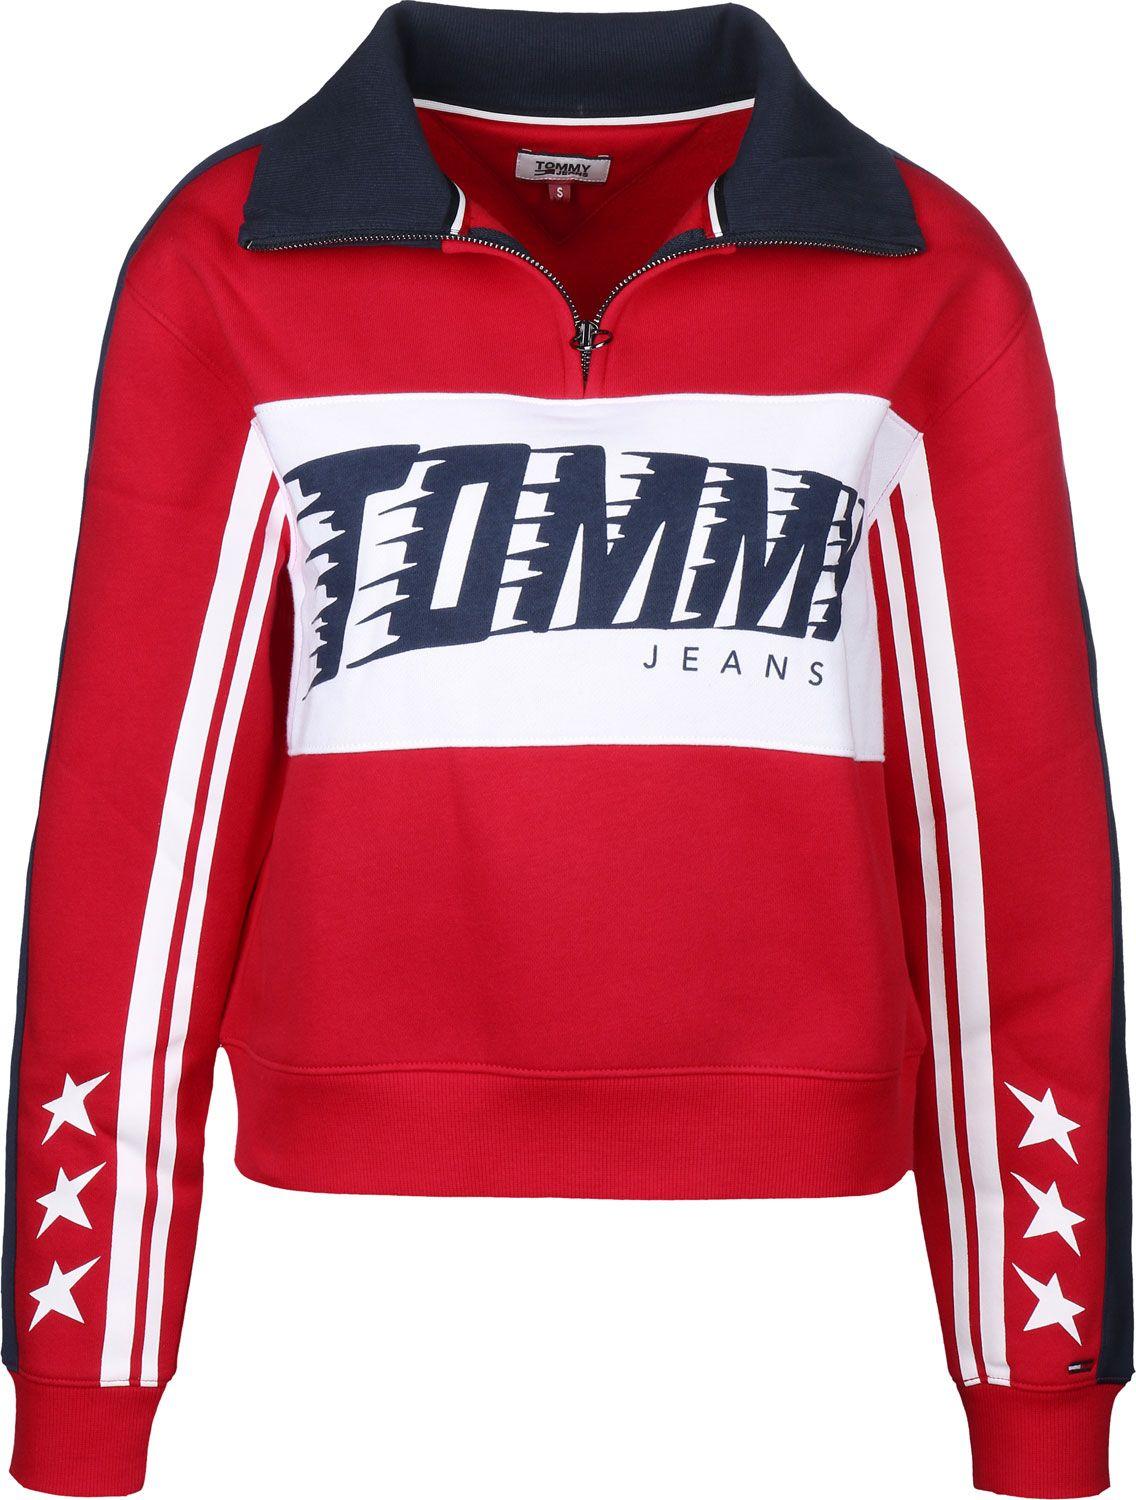 Red and White for the W Logo - Tommy Jeans Racing Logo Pop Over W sweater red blue white